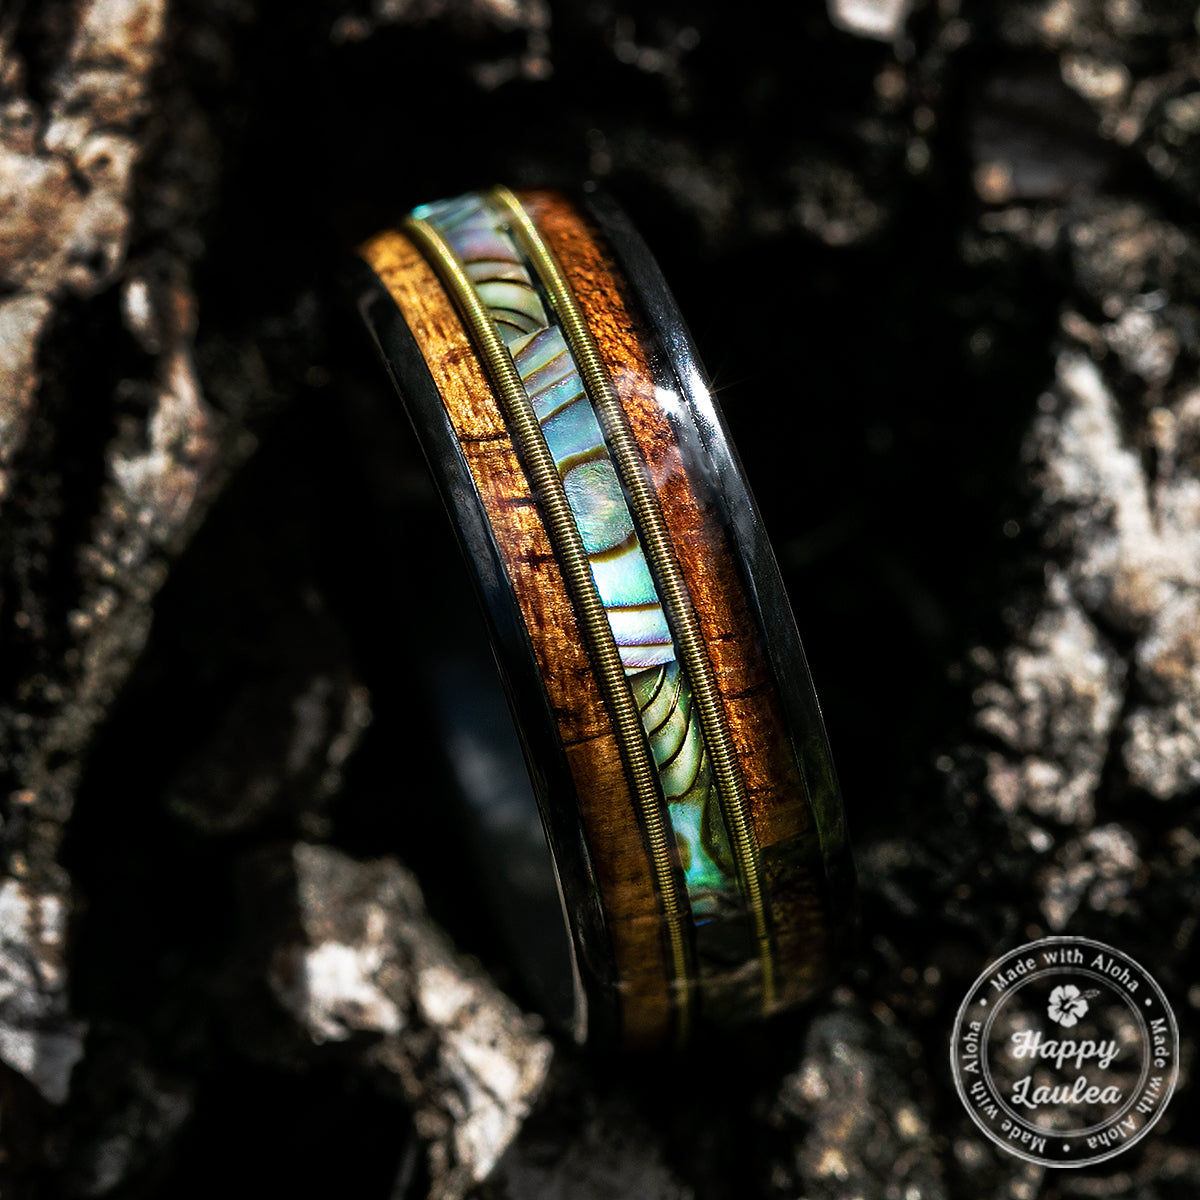 Black Zirconium Ring with Guitar String, Abalone Shell, & Koa Wood Tri-Inlay - 8mm, Dome Shape, Comfort Fitment